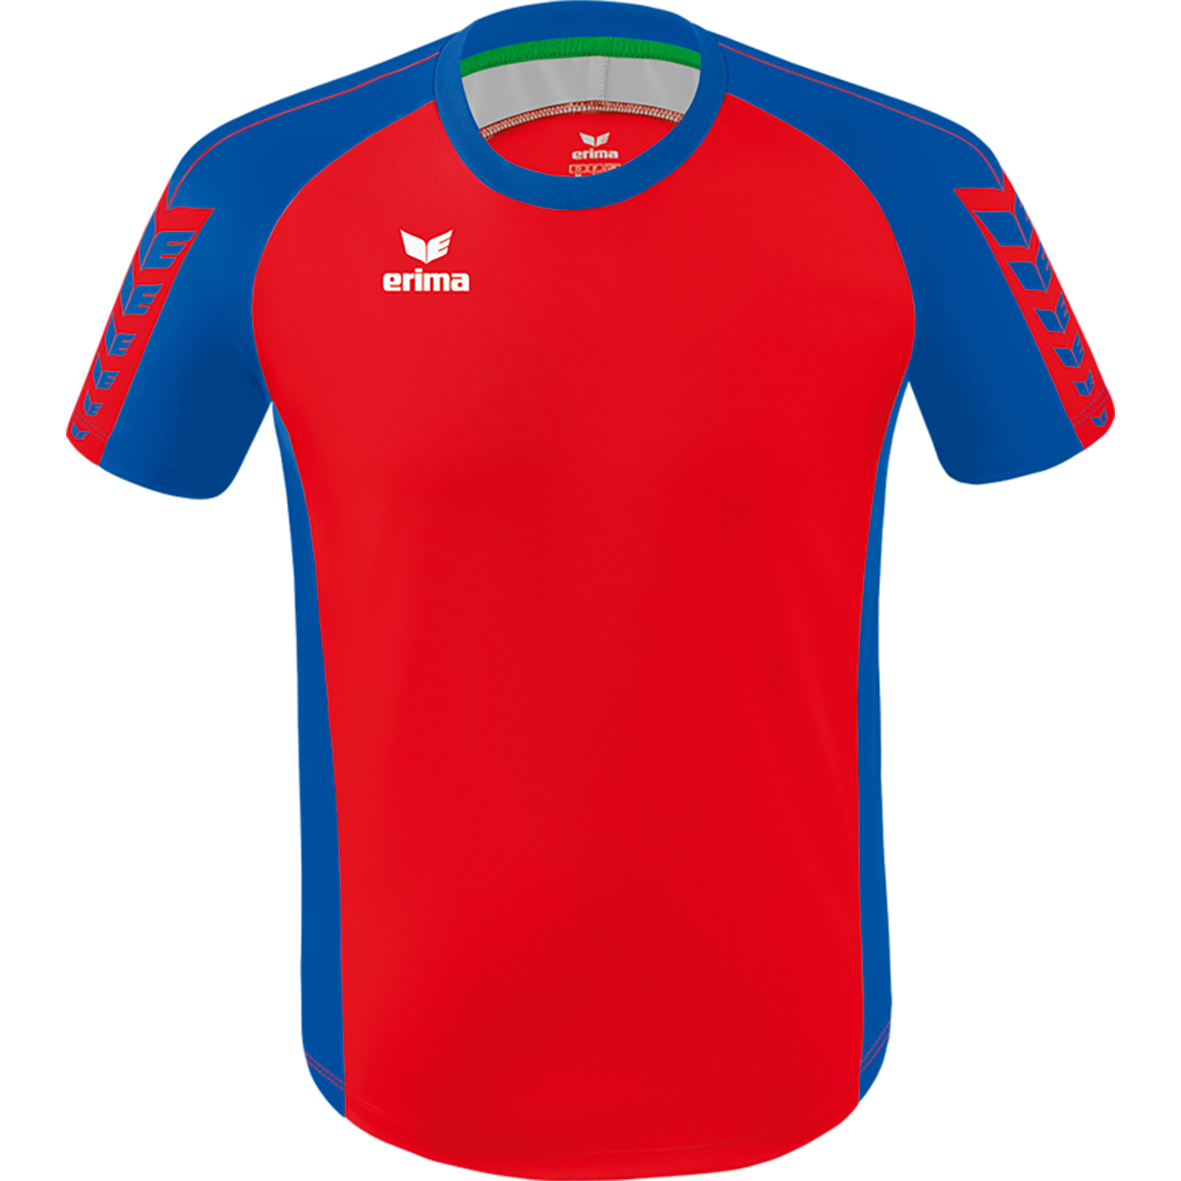 ERIMA SIX WINGS JERSEY SHORT SLEEVE, RED-NEW ROYAL KIDS.